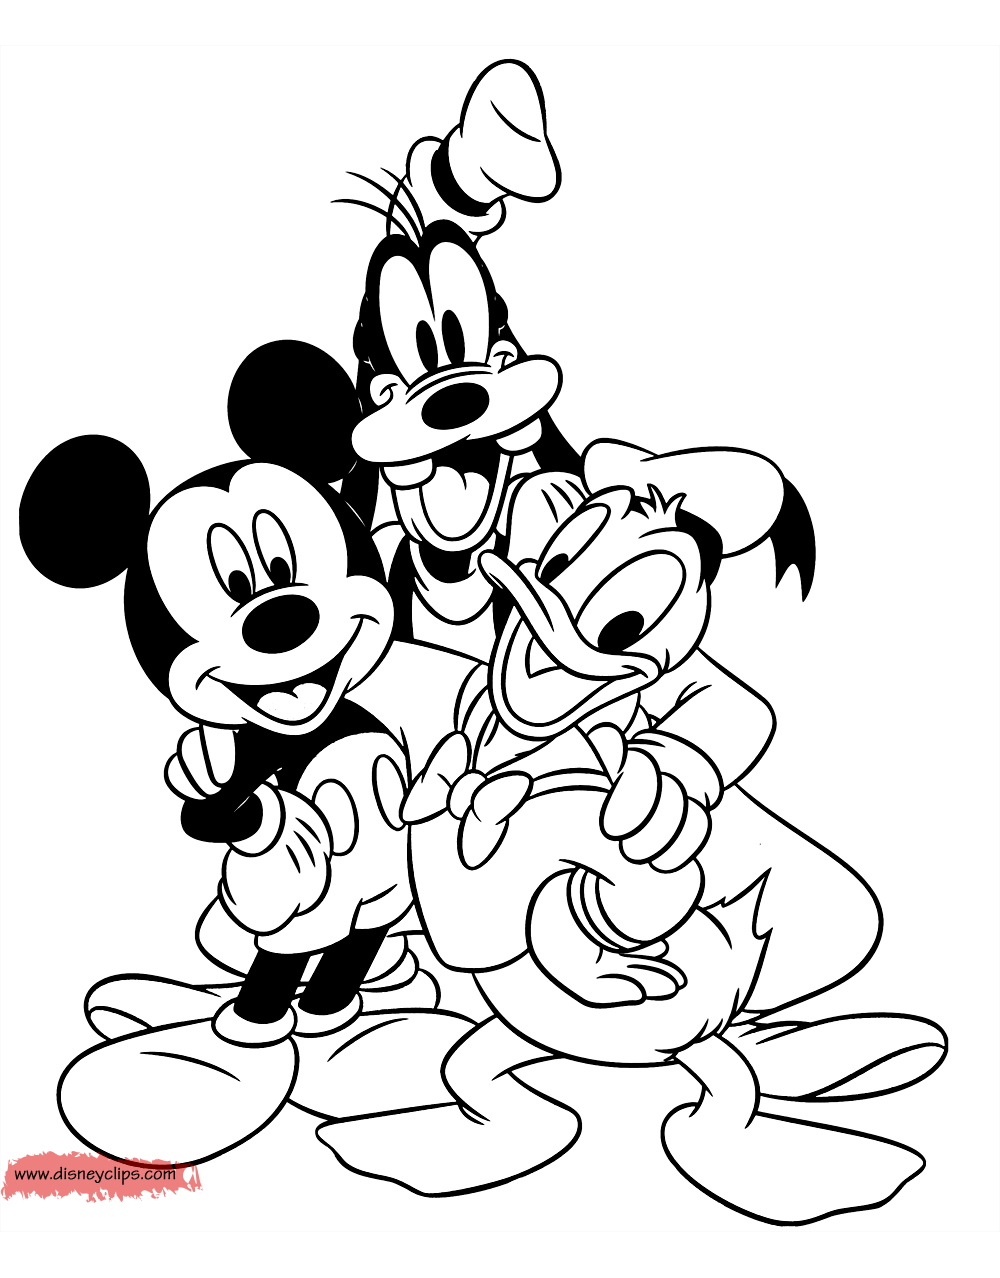 Mickey Mouse Friends Coloring Pages 2 Disney39s World